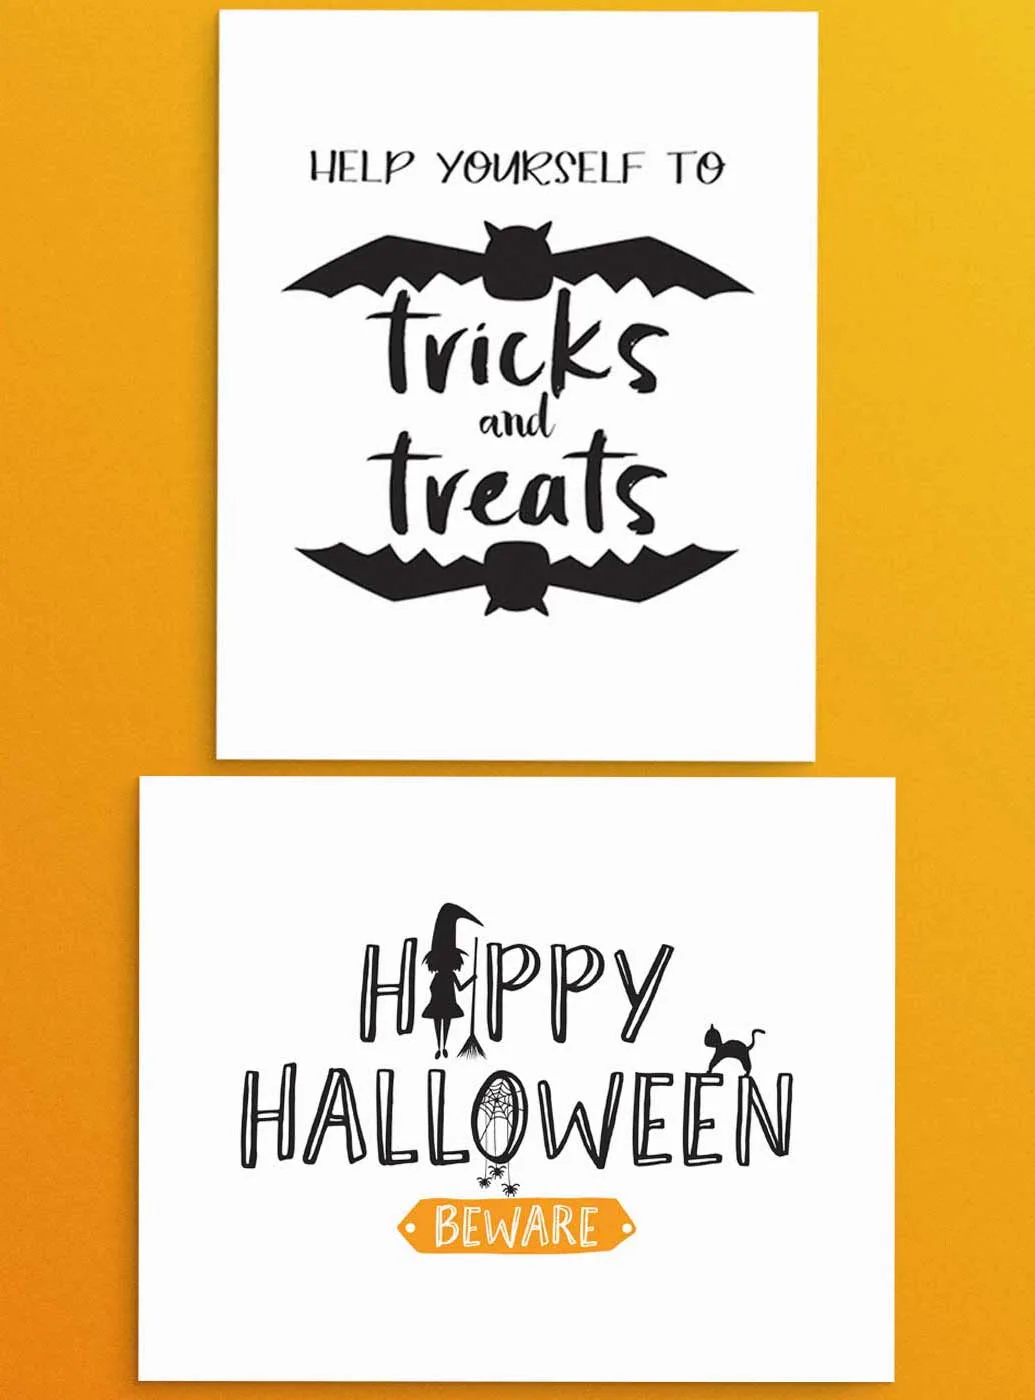 Free Halloween party printables signs that read, "Help yourself to Tricks and Treats" and "Happy Halloween - Beware". Use for entry way or snack and party favor table. Orange and Black color scheme.